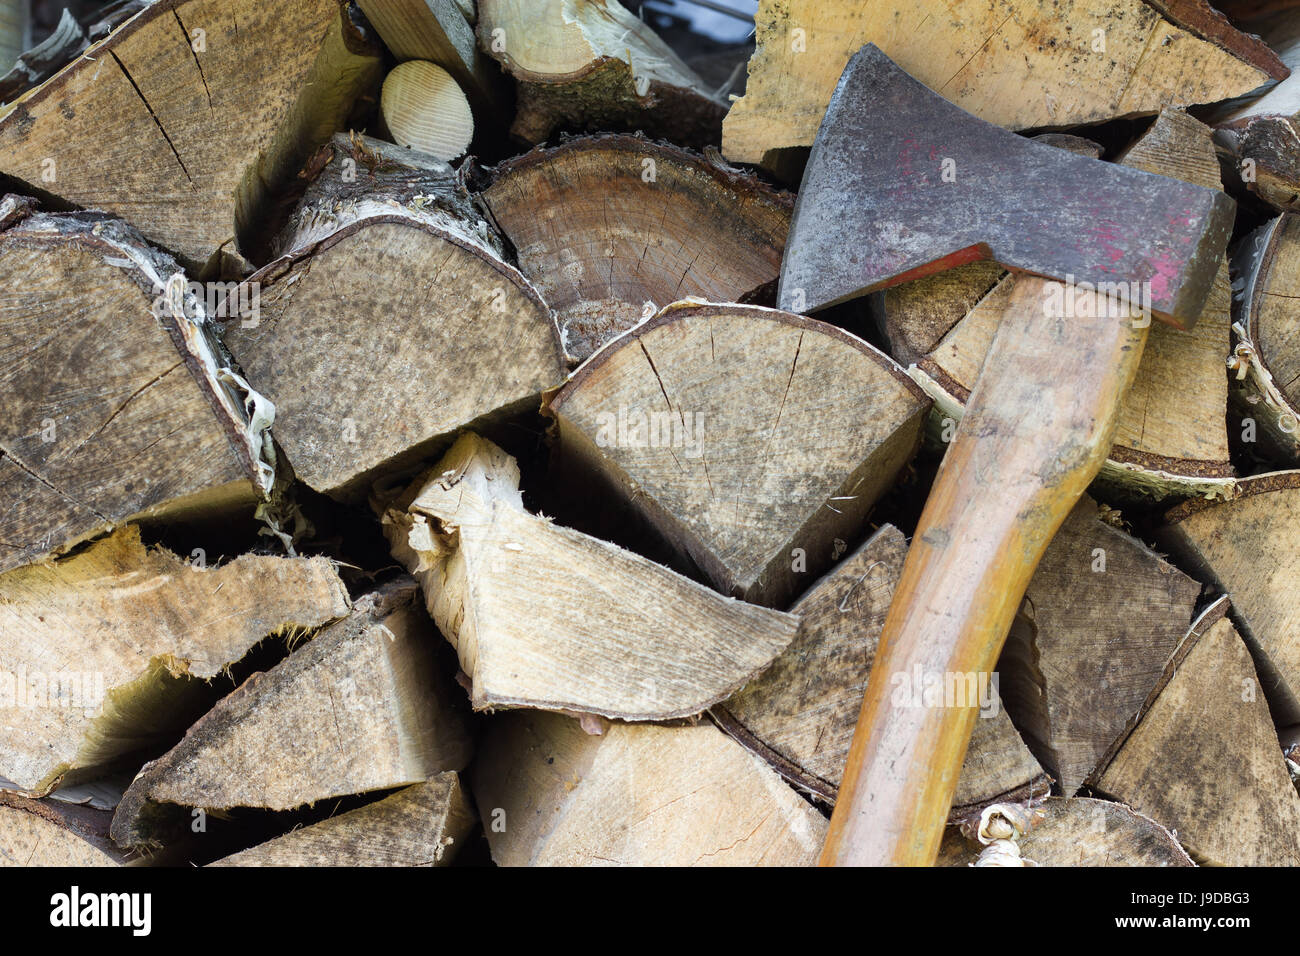 wood, stack, axe, firewood, strength, force, chop, environment, enviroment, Stock Photo